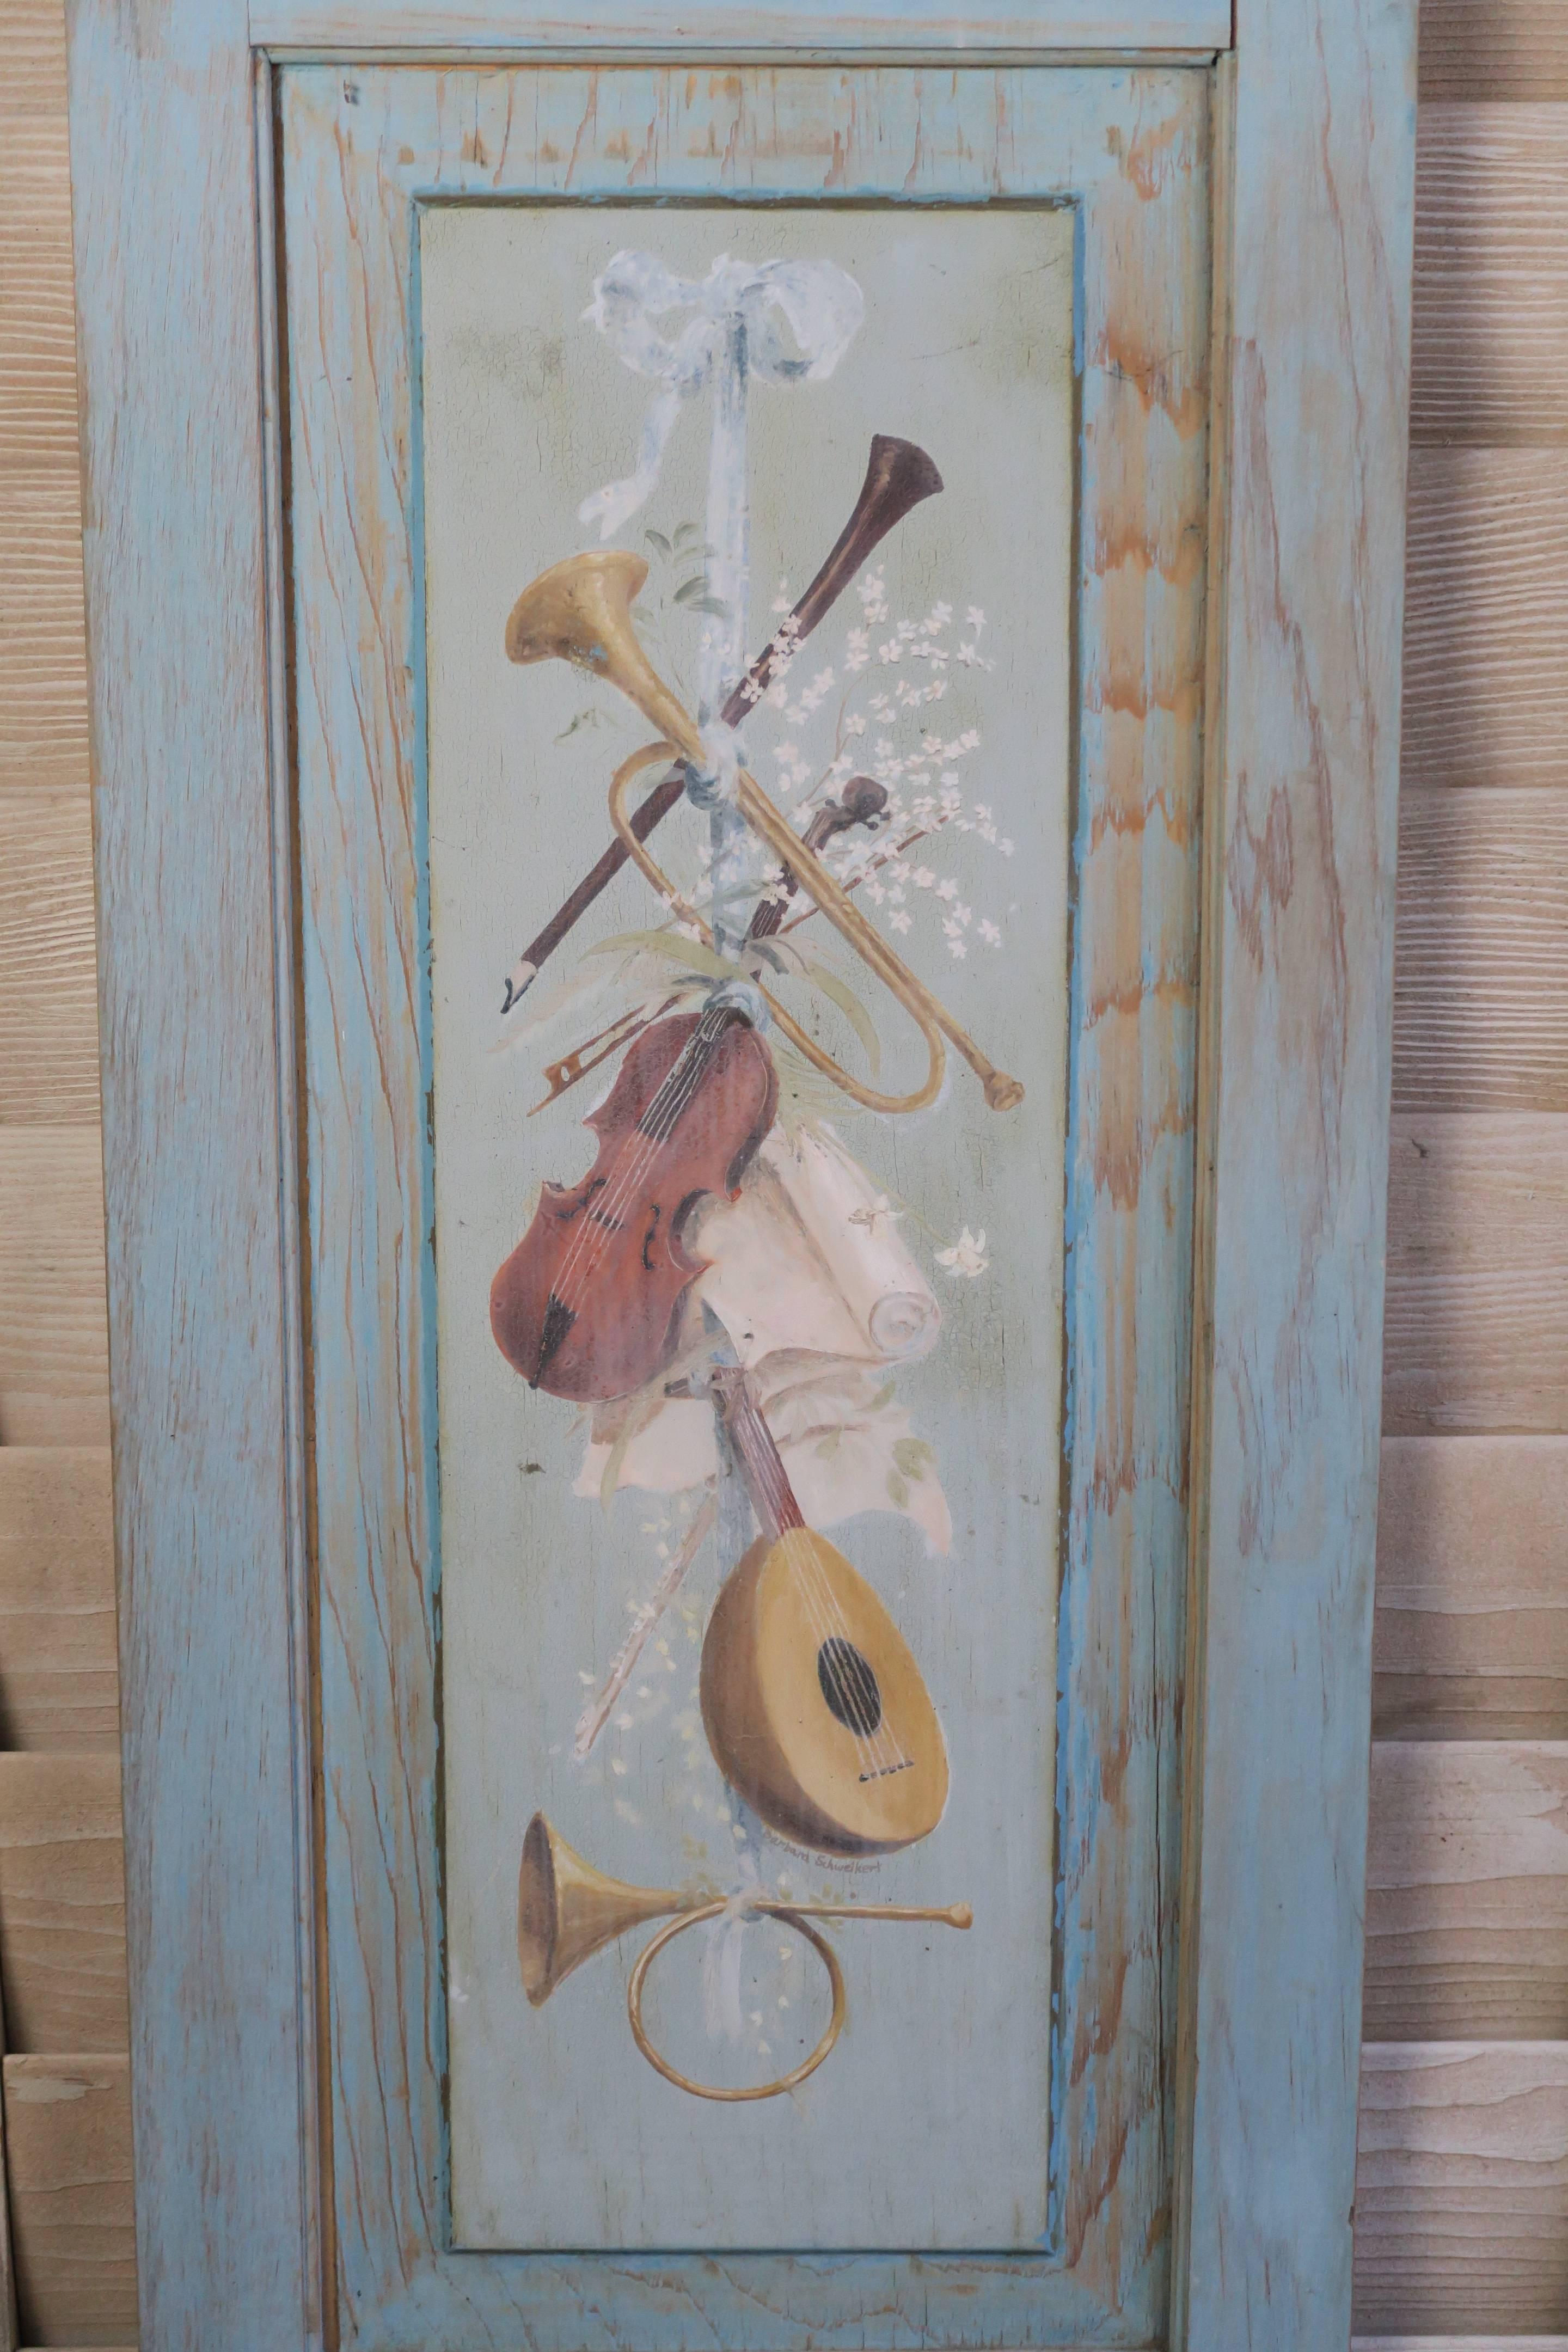 French blue painted panels with musical instruments, birds and branches. Worn painted finish in beautiful shades of blue, green and gold.